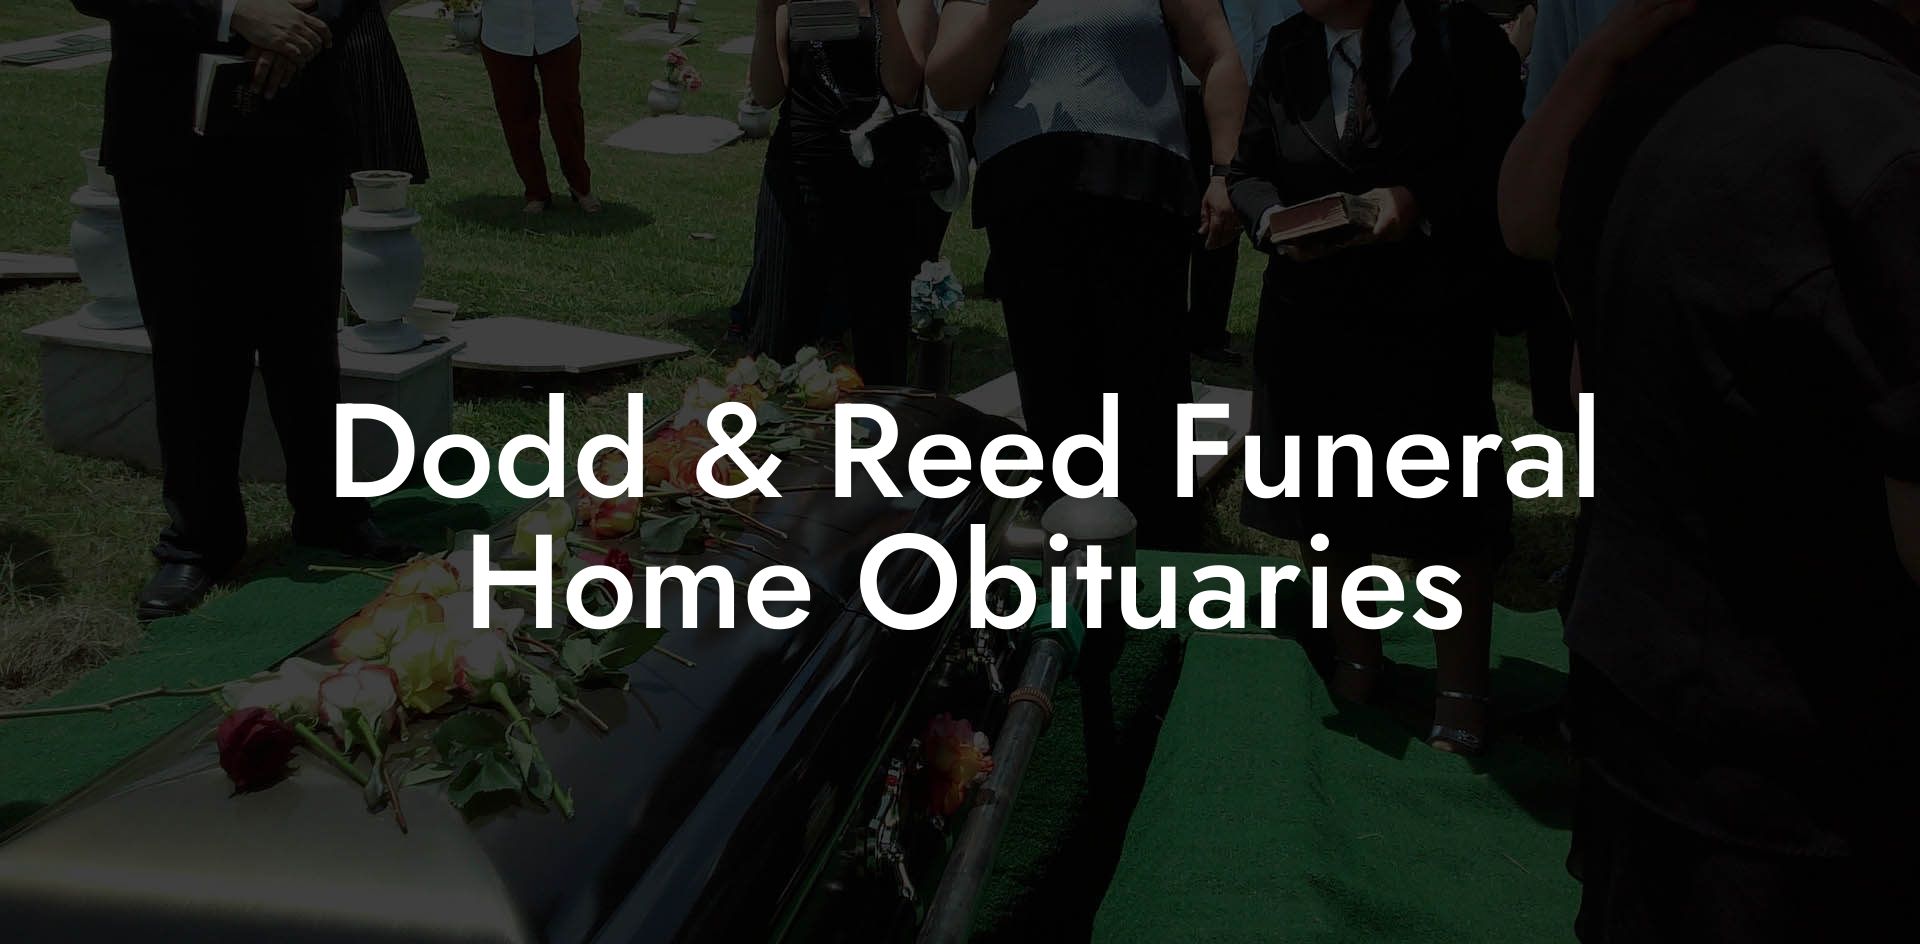 Dodd & Reed Funeral Home Obituaries